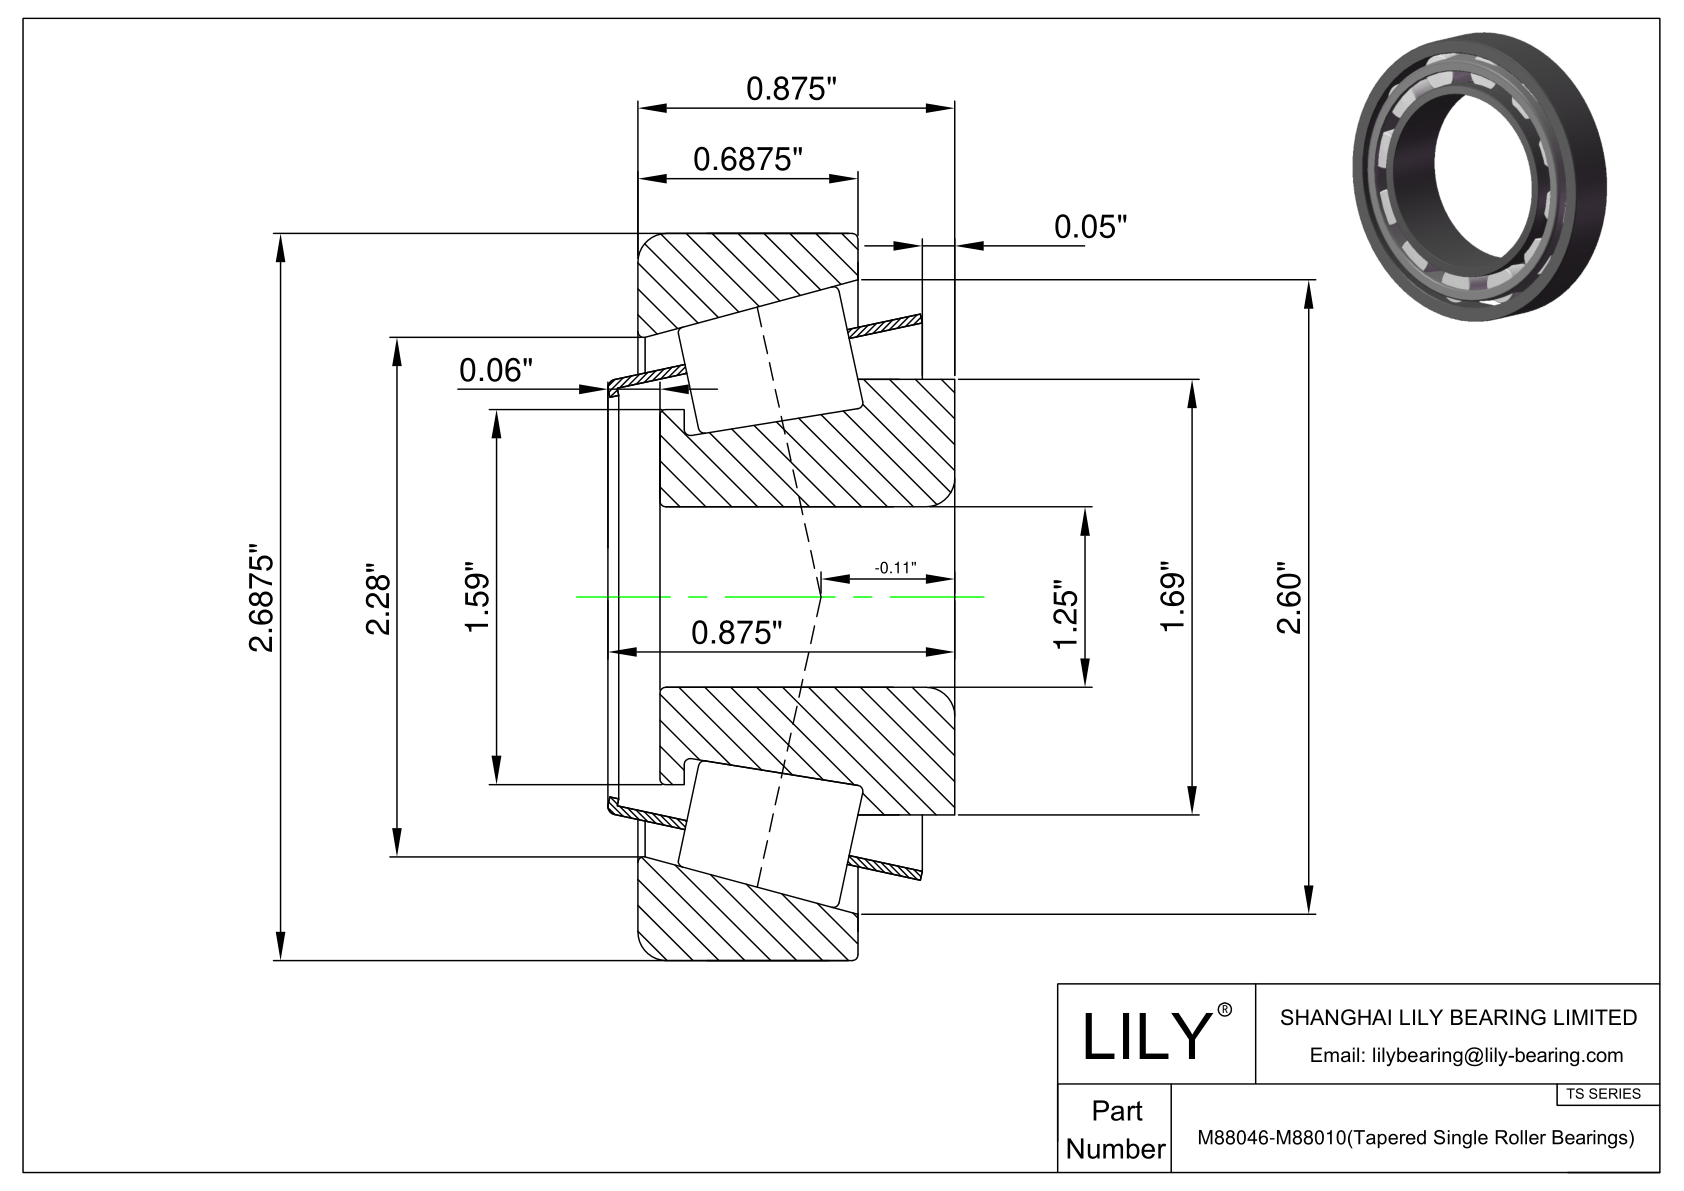 M88046-M88010 TS (Tapered Single Roller Bearings) (Imperial) cad drawing